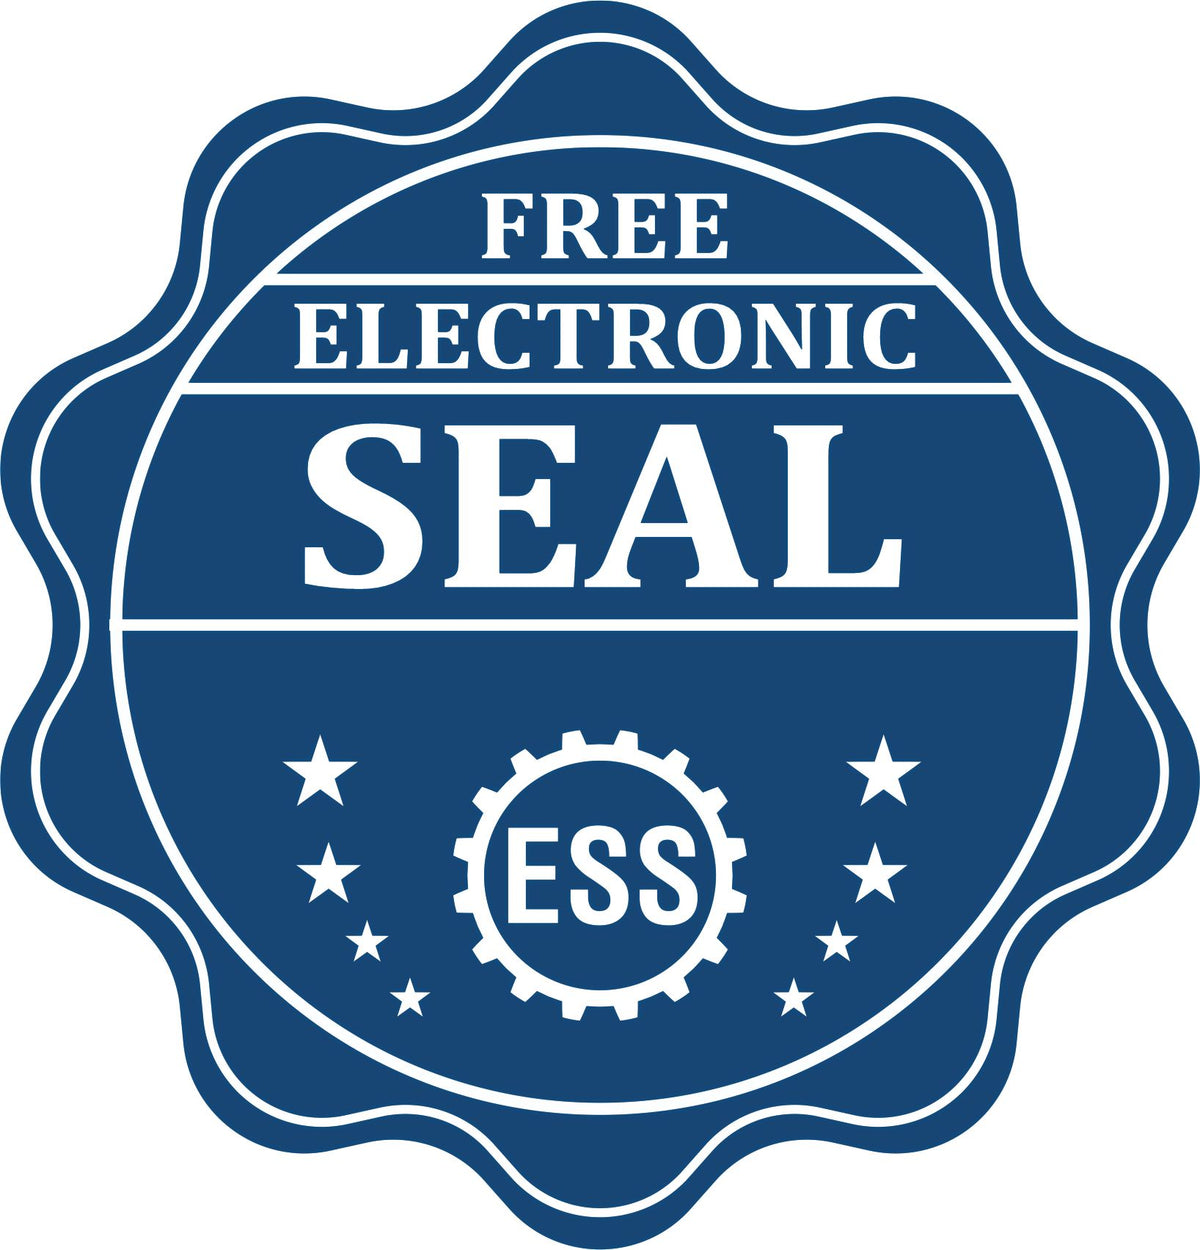 A badge showing a free electronic seal for the Heavy-Duty Illinois Rectangular Notary Stamp with stars and the ESS gear on the emblem.